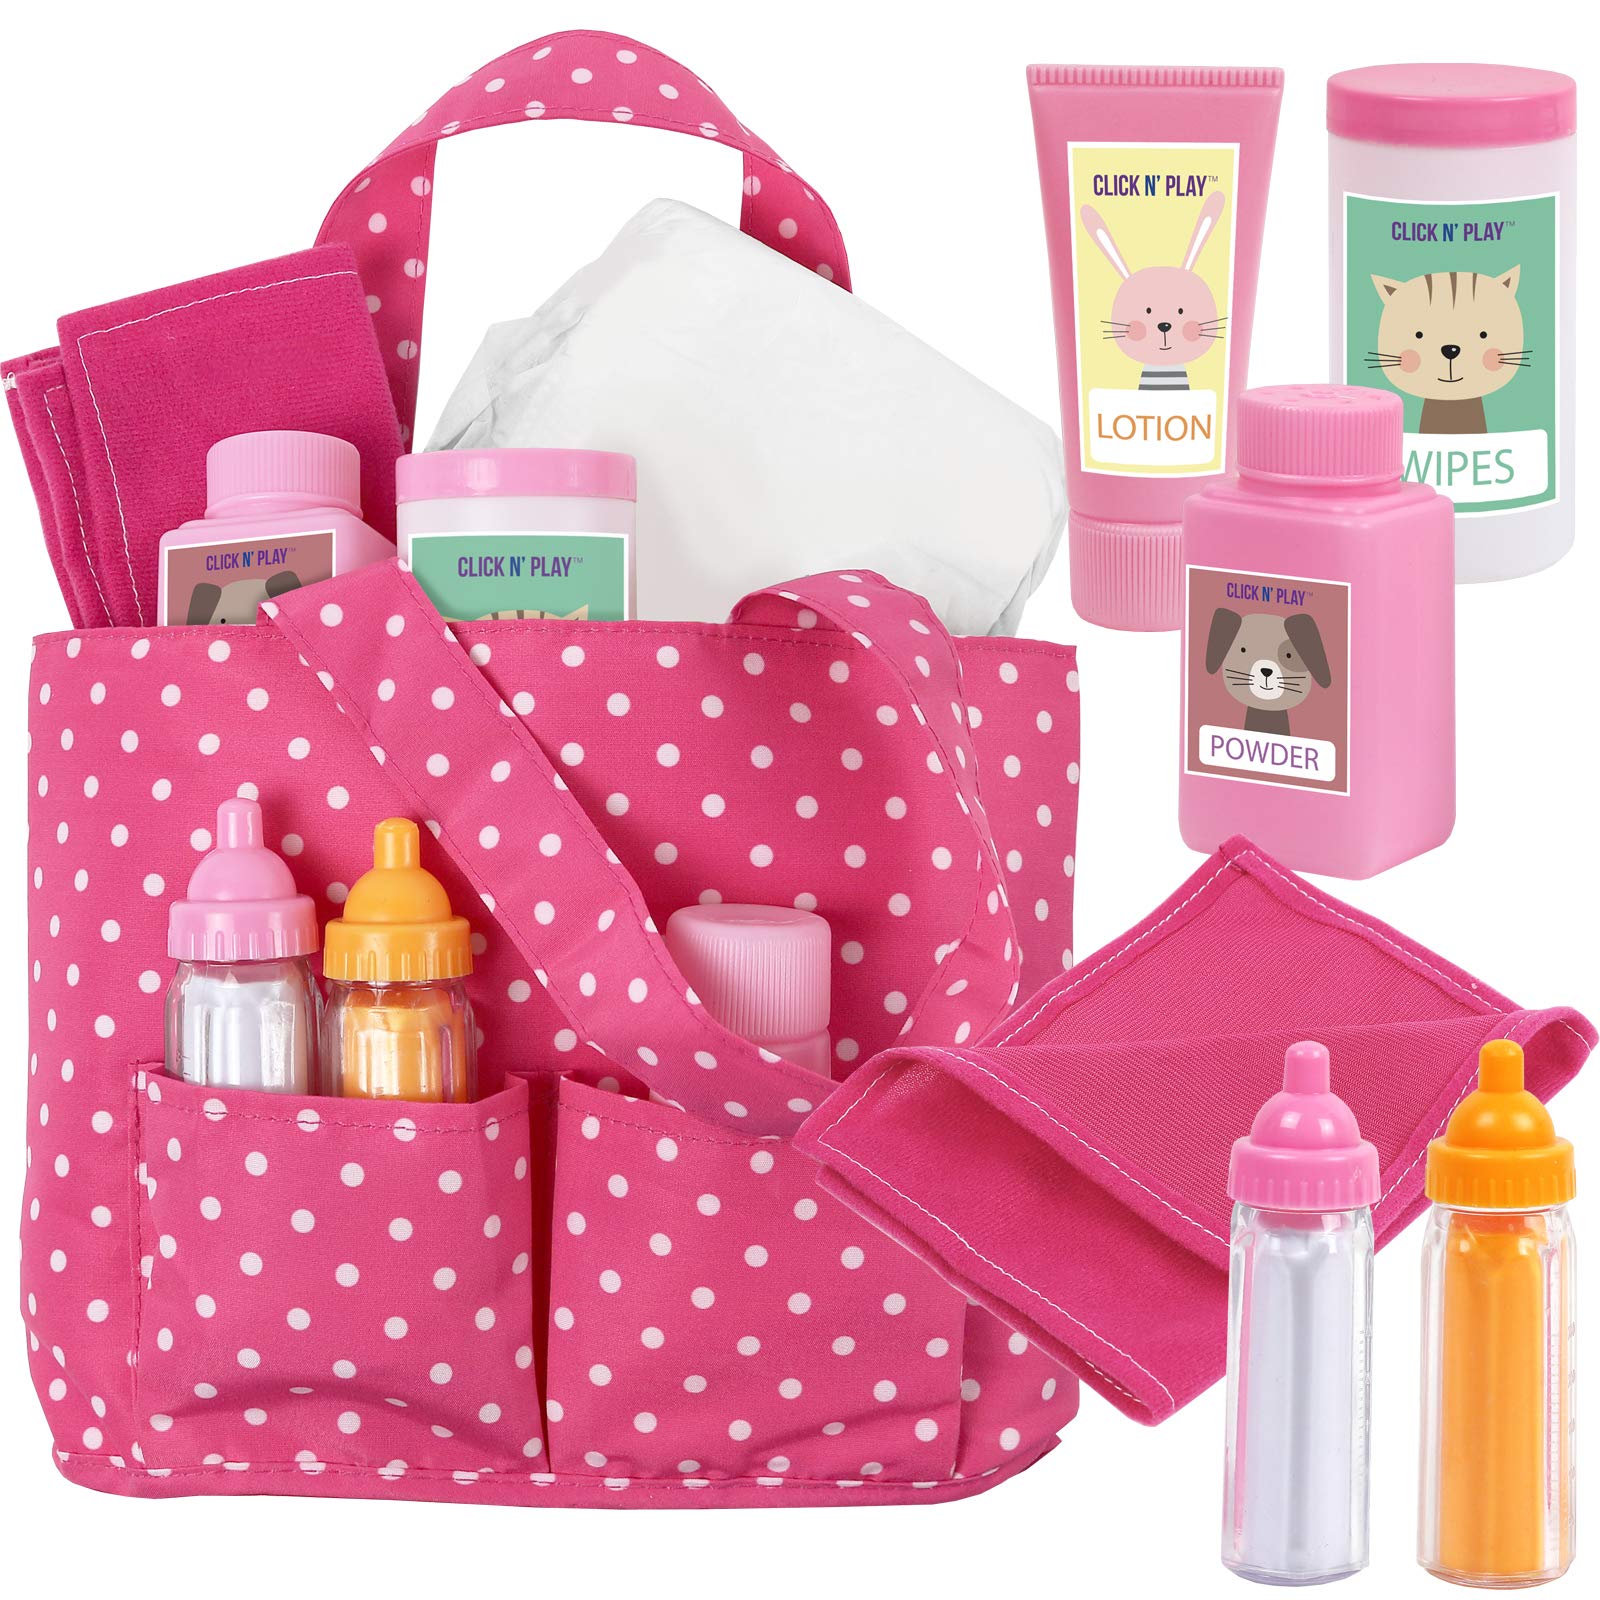 Click N' Play Baby Girl Doll Diaper Bag, Pink Soft Carrying Bag Including Cleaning, Caring, & Feeding Accessories - Bag, Baby Doll Diapers, Baby Doll Bottles for Feeding, Towel, Powder, Lotion, Wipes